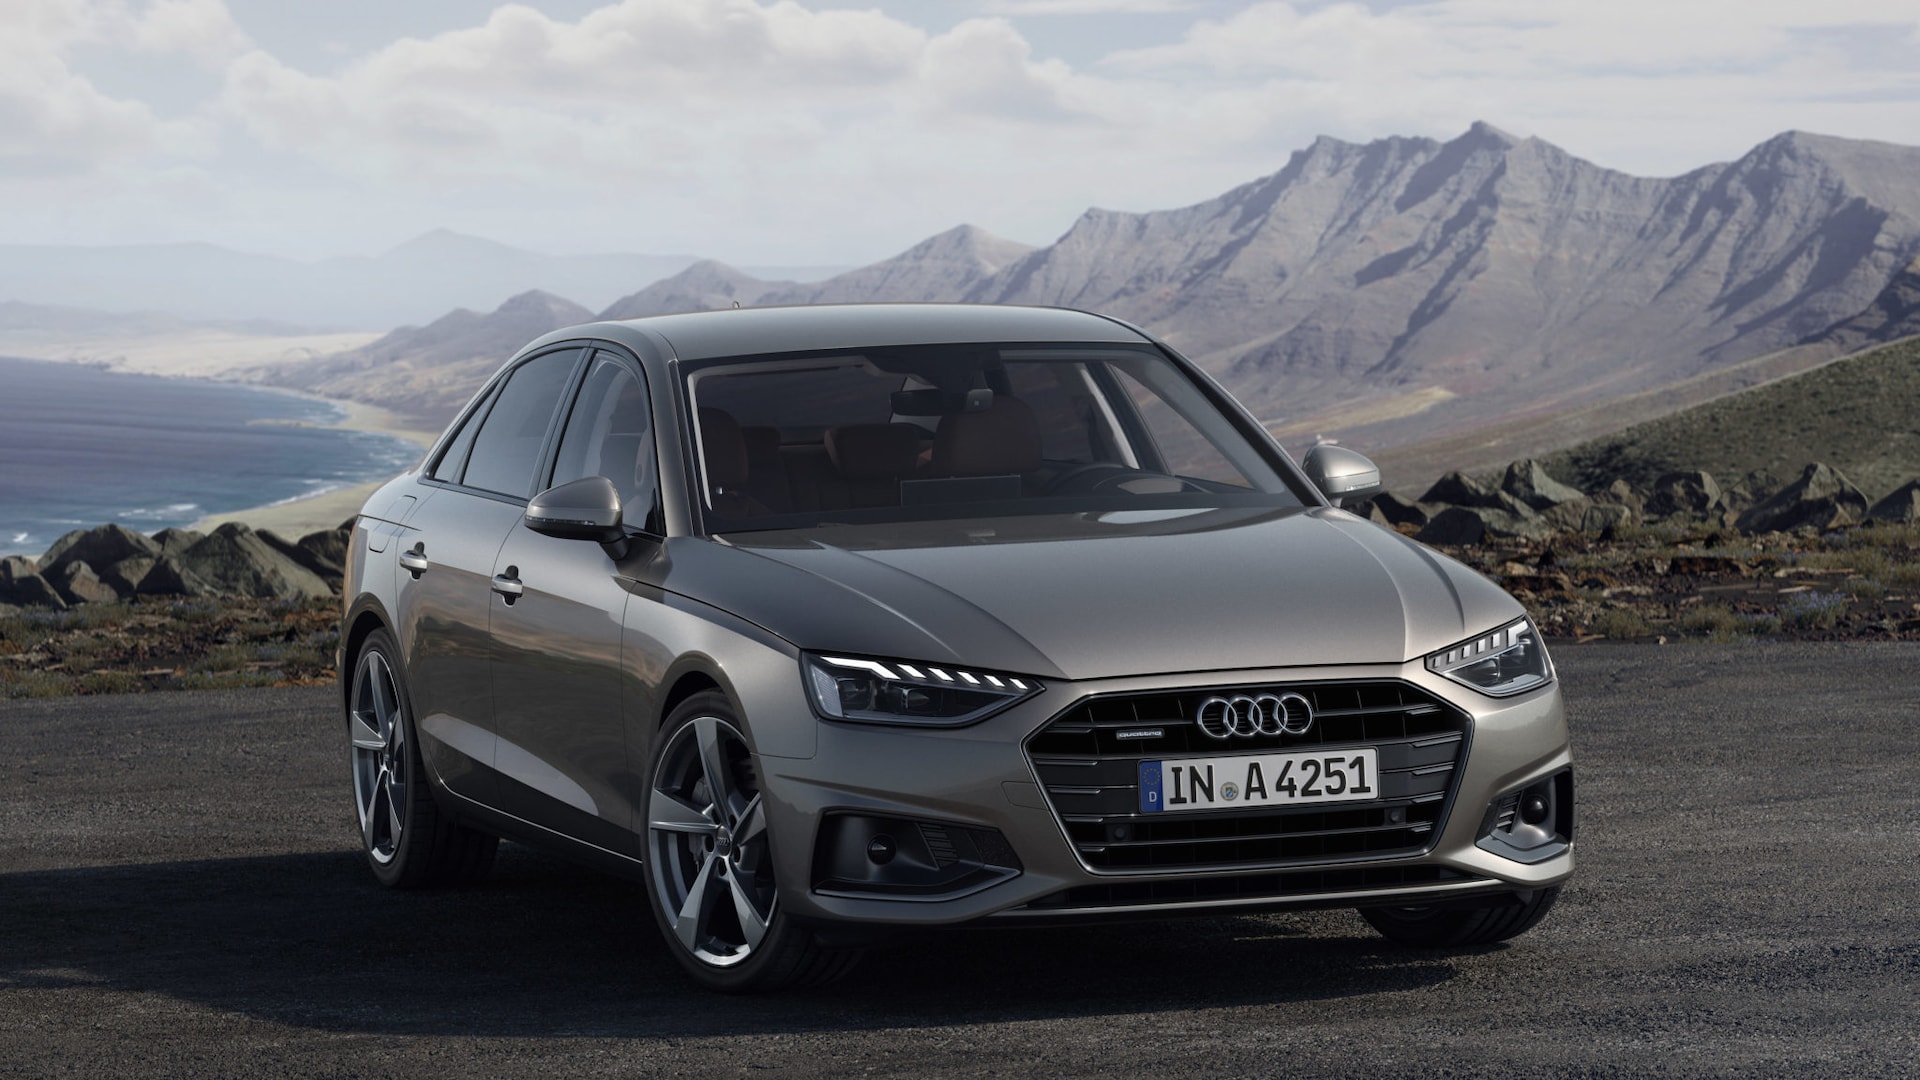 2020 Audi A4 First Look: What to Know About the Refreshed Luxury Sedan